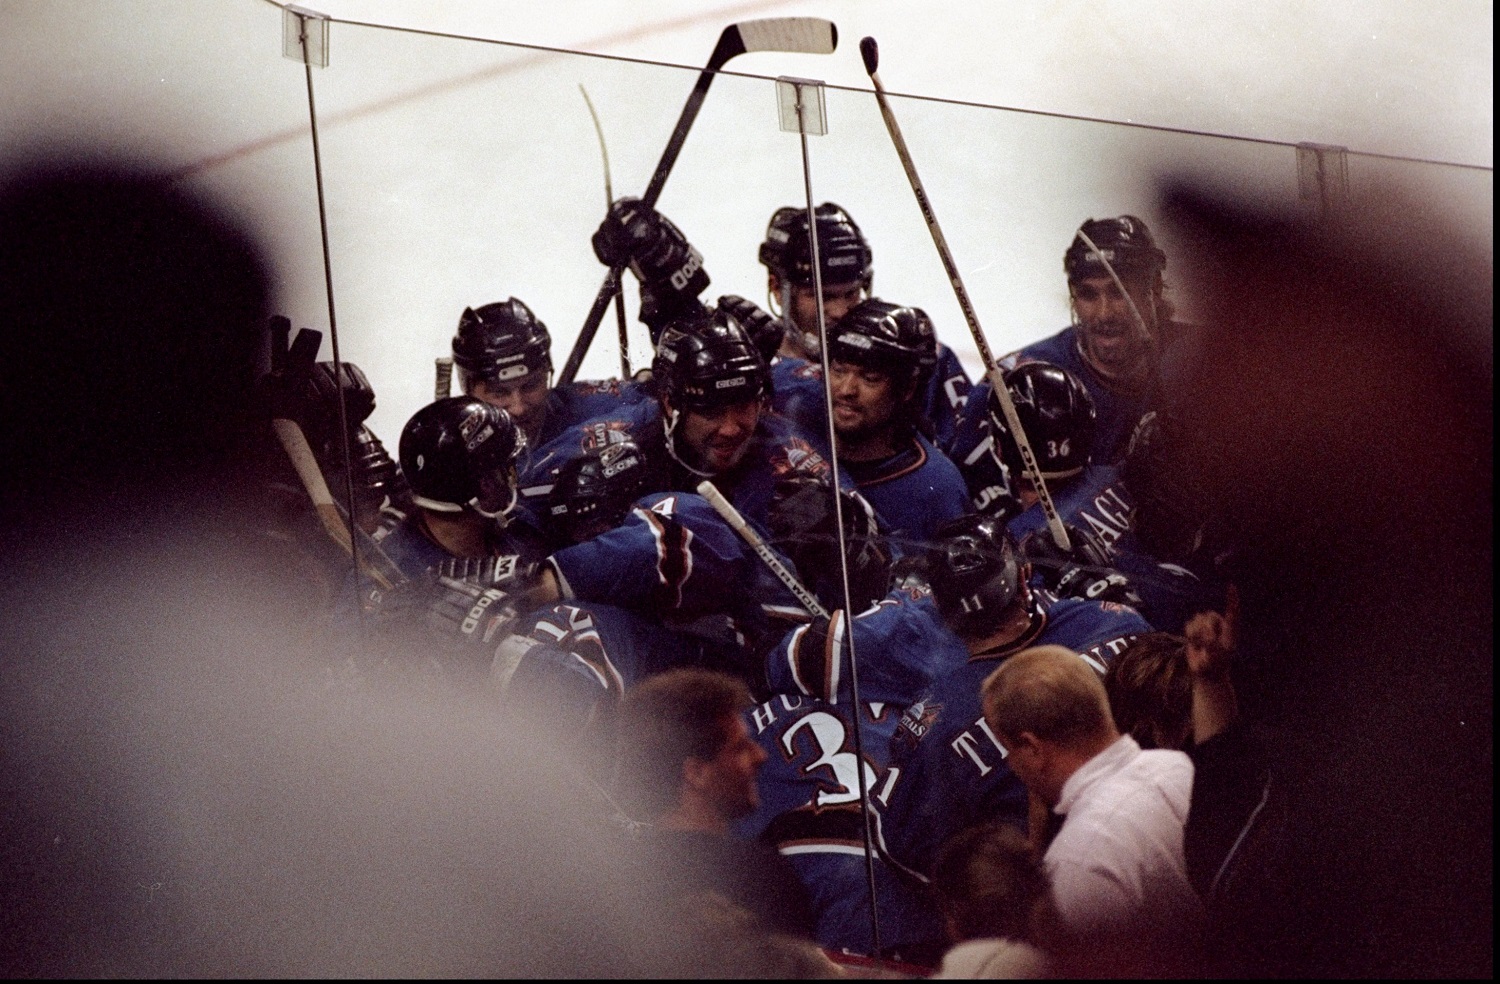 28 May 1998: Players from the Washington Capitals celebrate during an Eastern Conference Finals playoff game against the Buffalo Sabres at the Marine Midland Arena in Buffalo, New York. The Capitals defeated the Sabres 4-3.